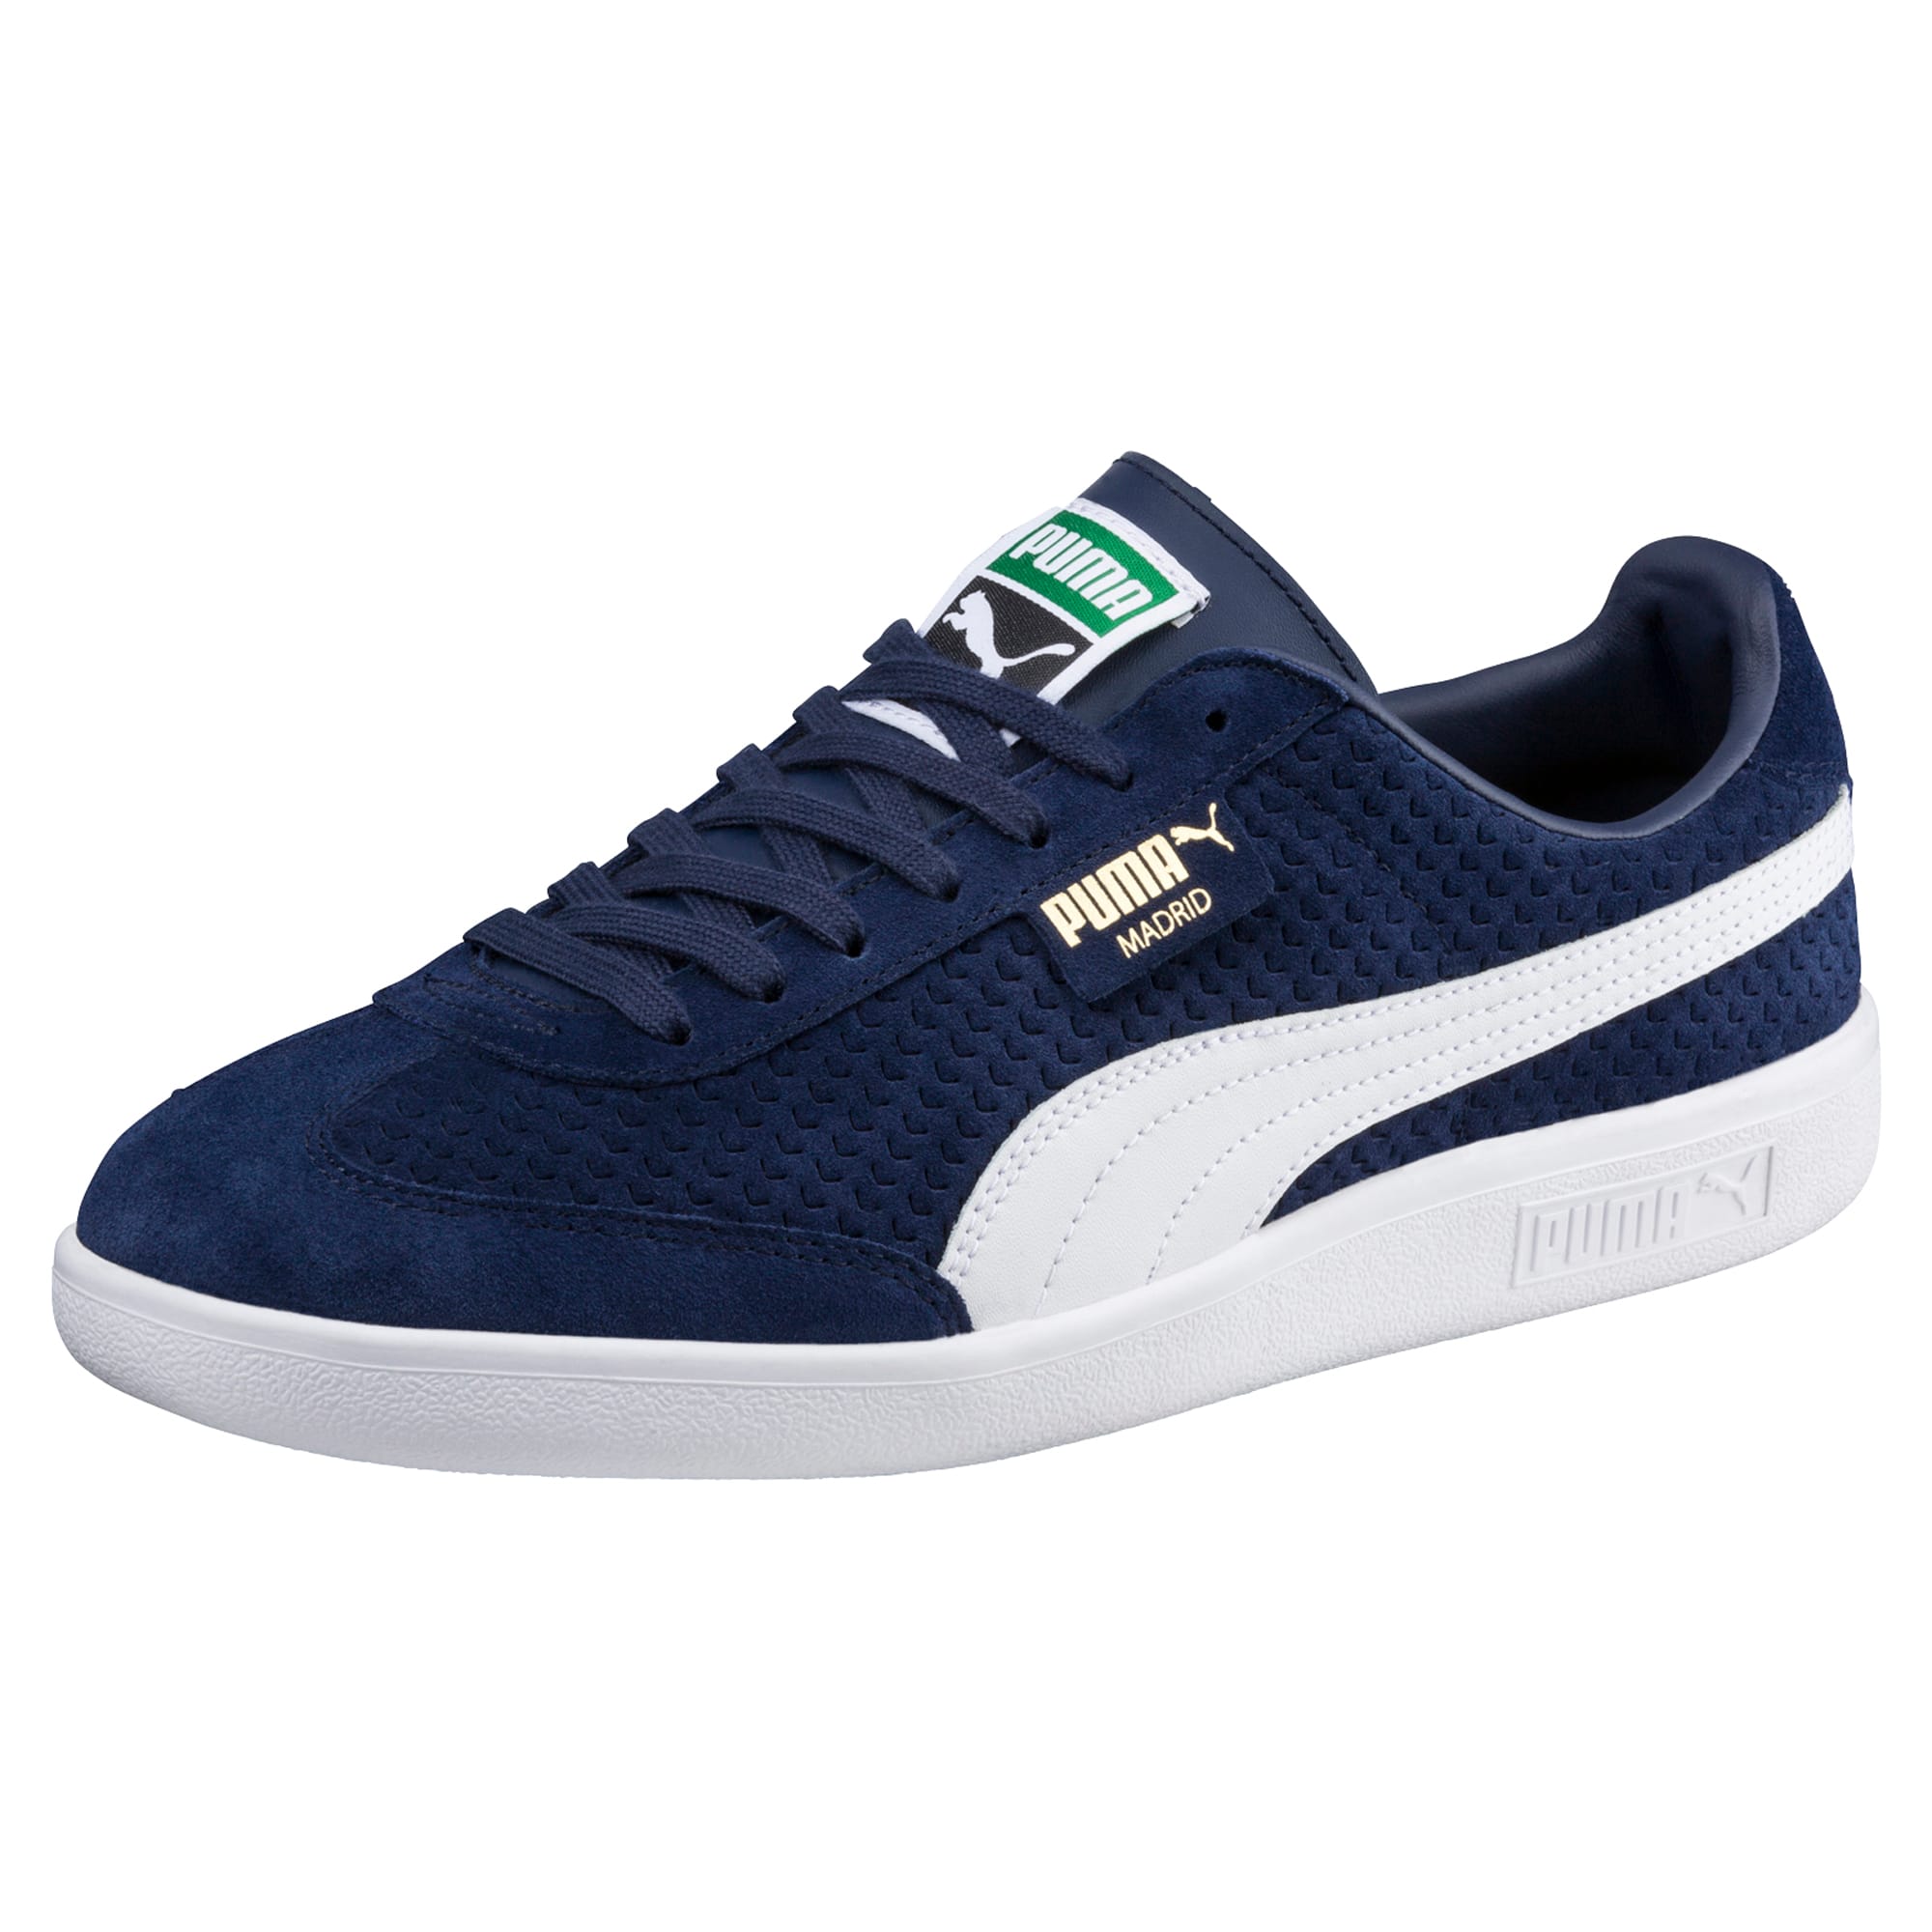 Madrid Perforated Suede Trainers | PUMA 